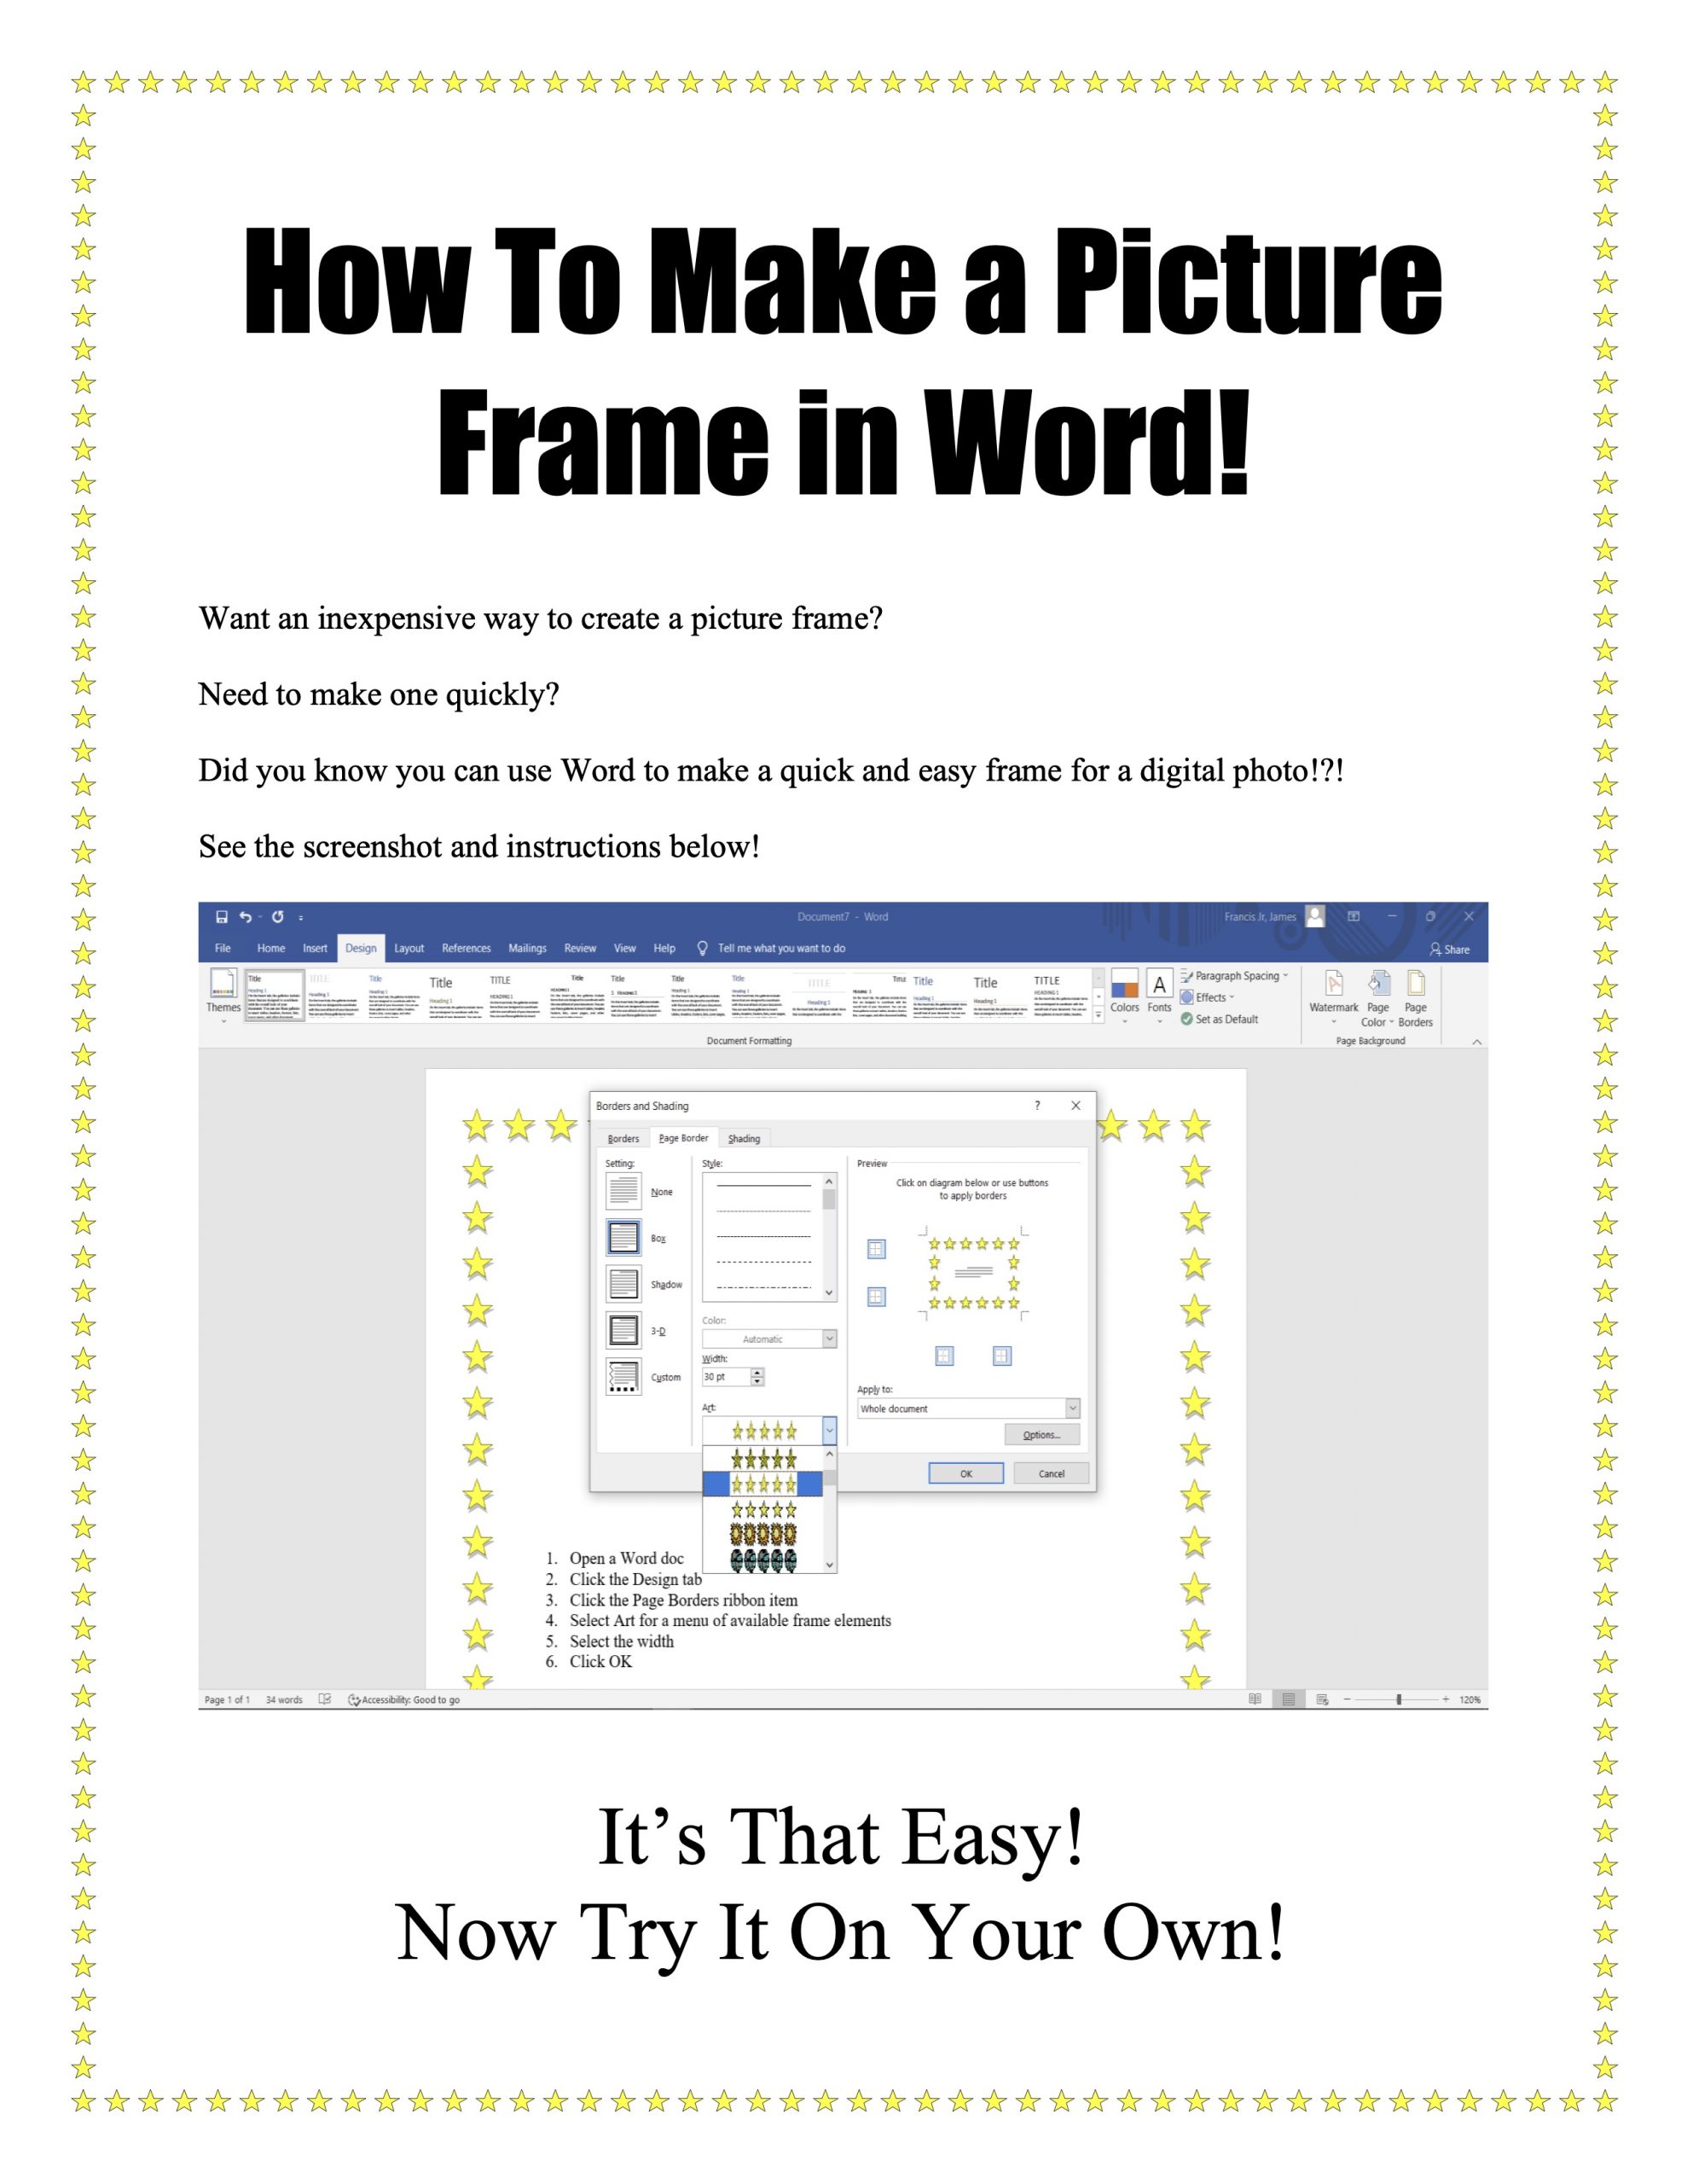 Sample student handout for how to make a picture frame using a Word document. The image demonstrates how to achieve visual appeal through variation in font size and color, as well as by including a graphic. In this case, the graphic within this graphic is a screen shot of the Microsoft Word dialog box for borders and shading.